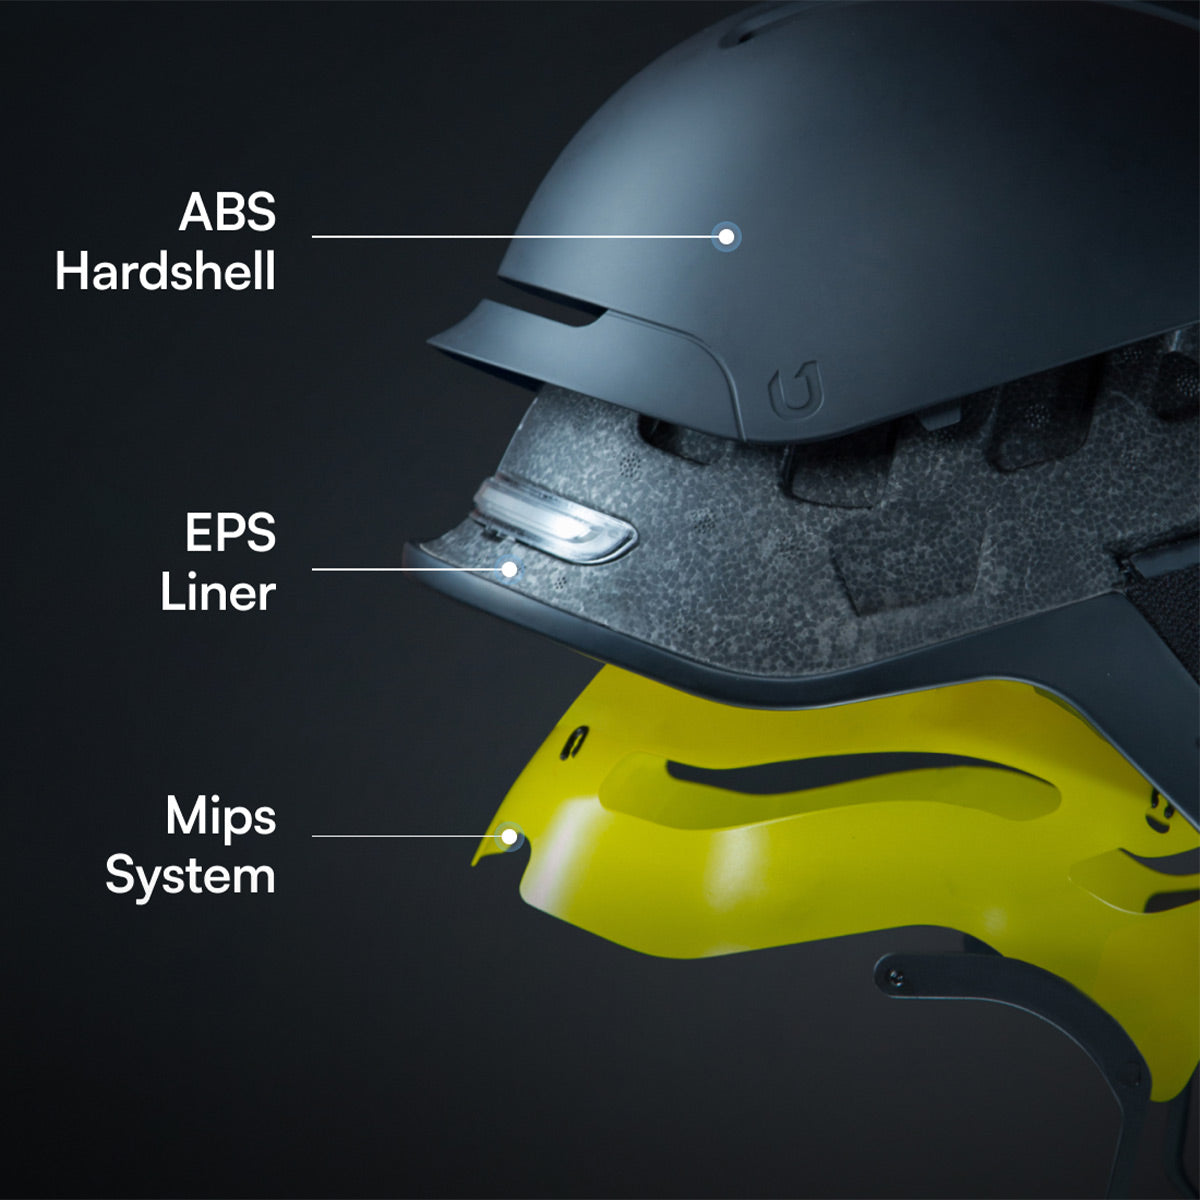 Unit 1 Large FARO Smart Helmet with IPX-6 Rating and Mips Impact Safety System (Blackbird)